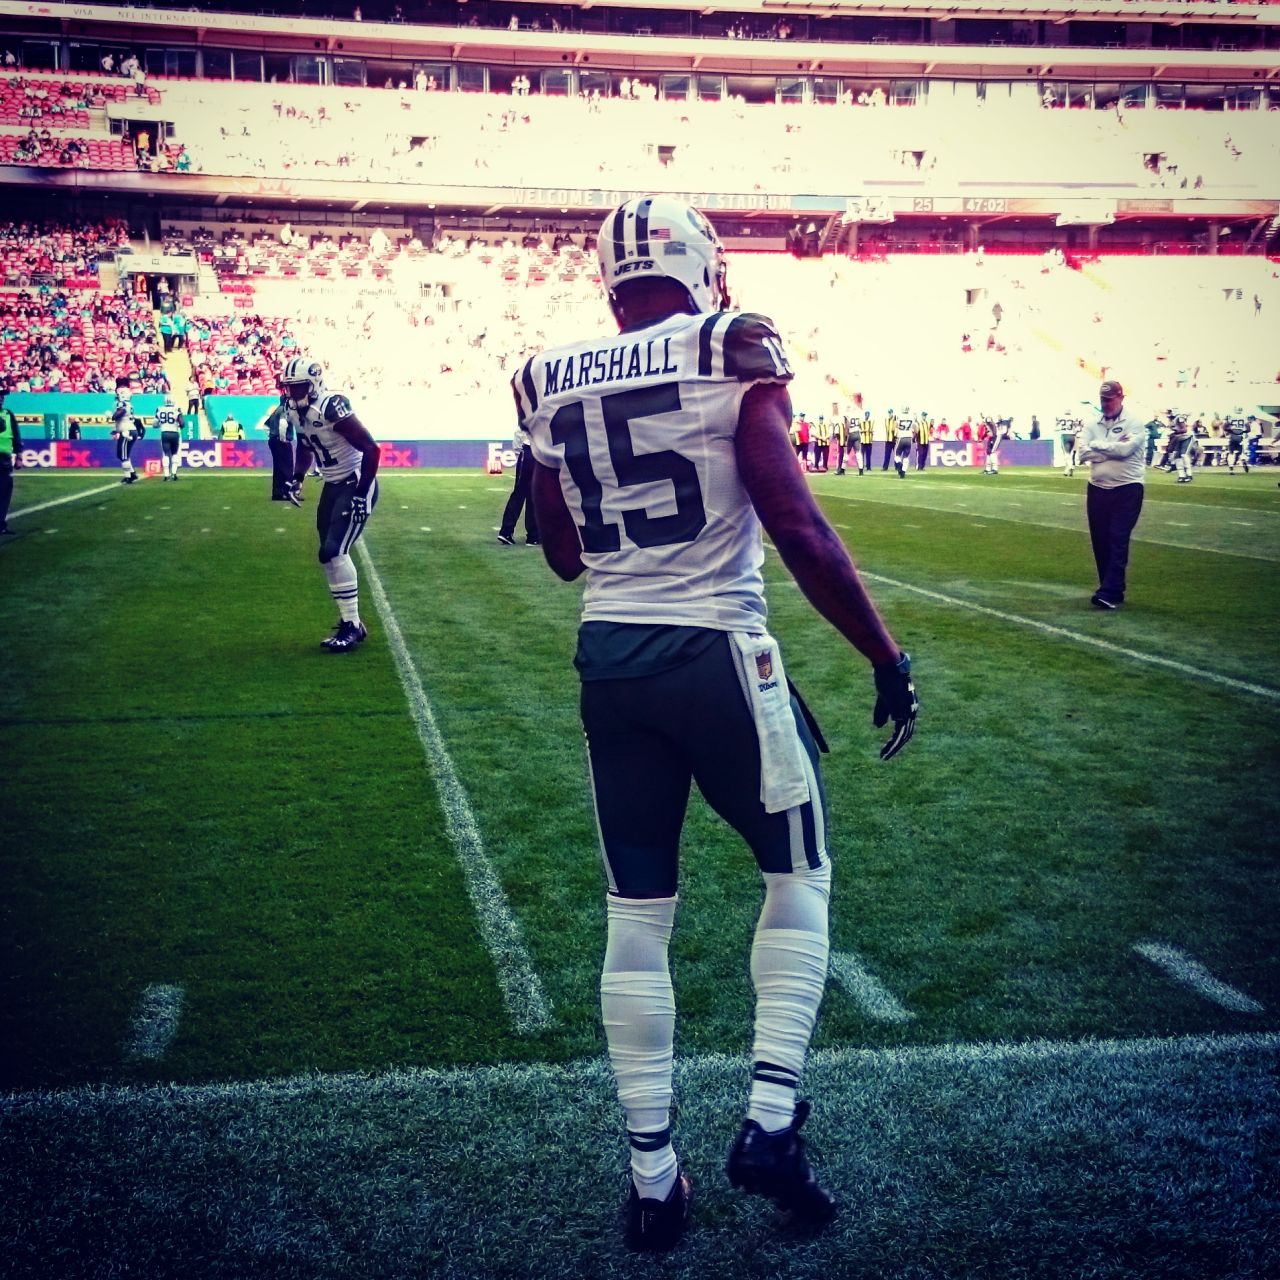 New York Jets wide receiver Brandon Marshall warms up on the Wembley pitch prior to his team's clash against the Miami Dolphins.